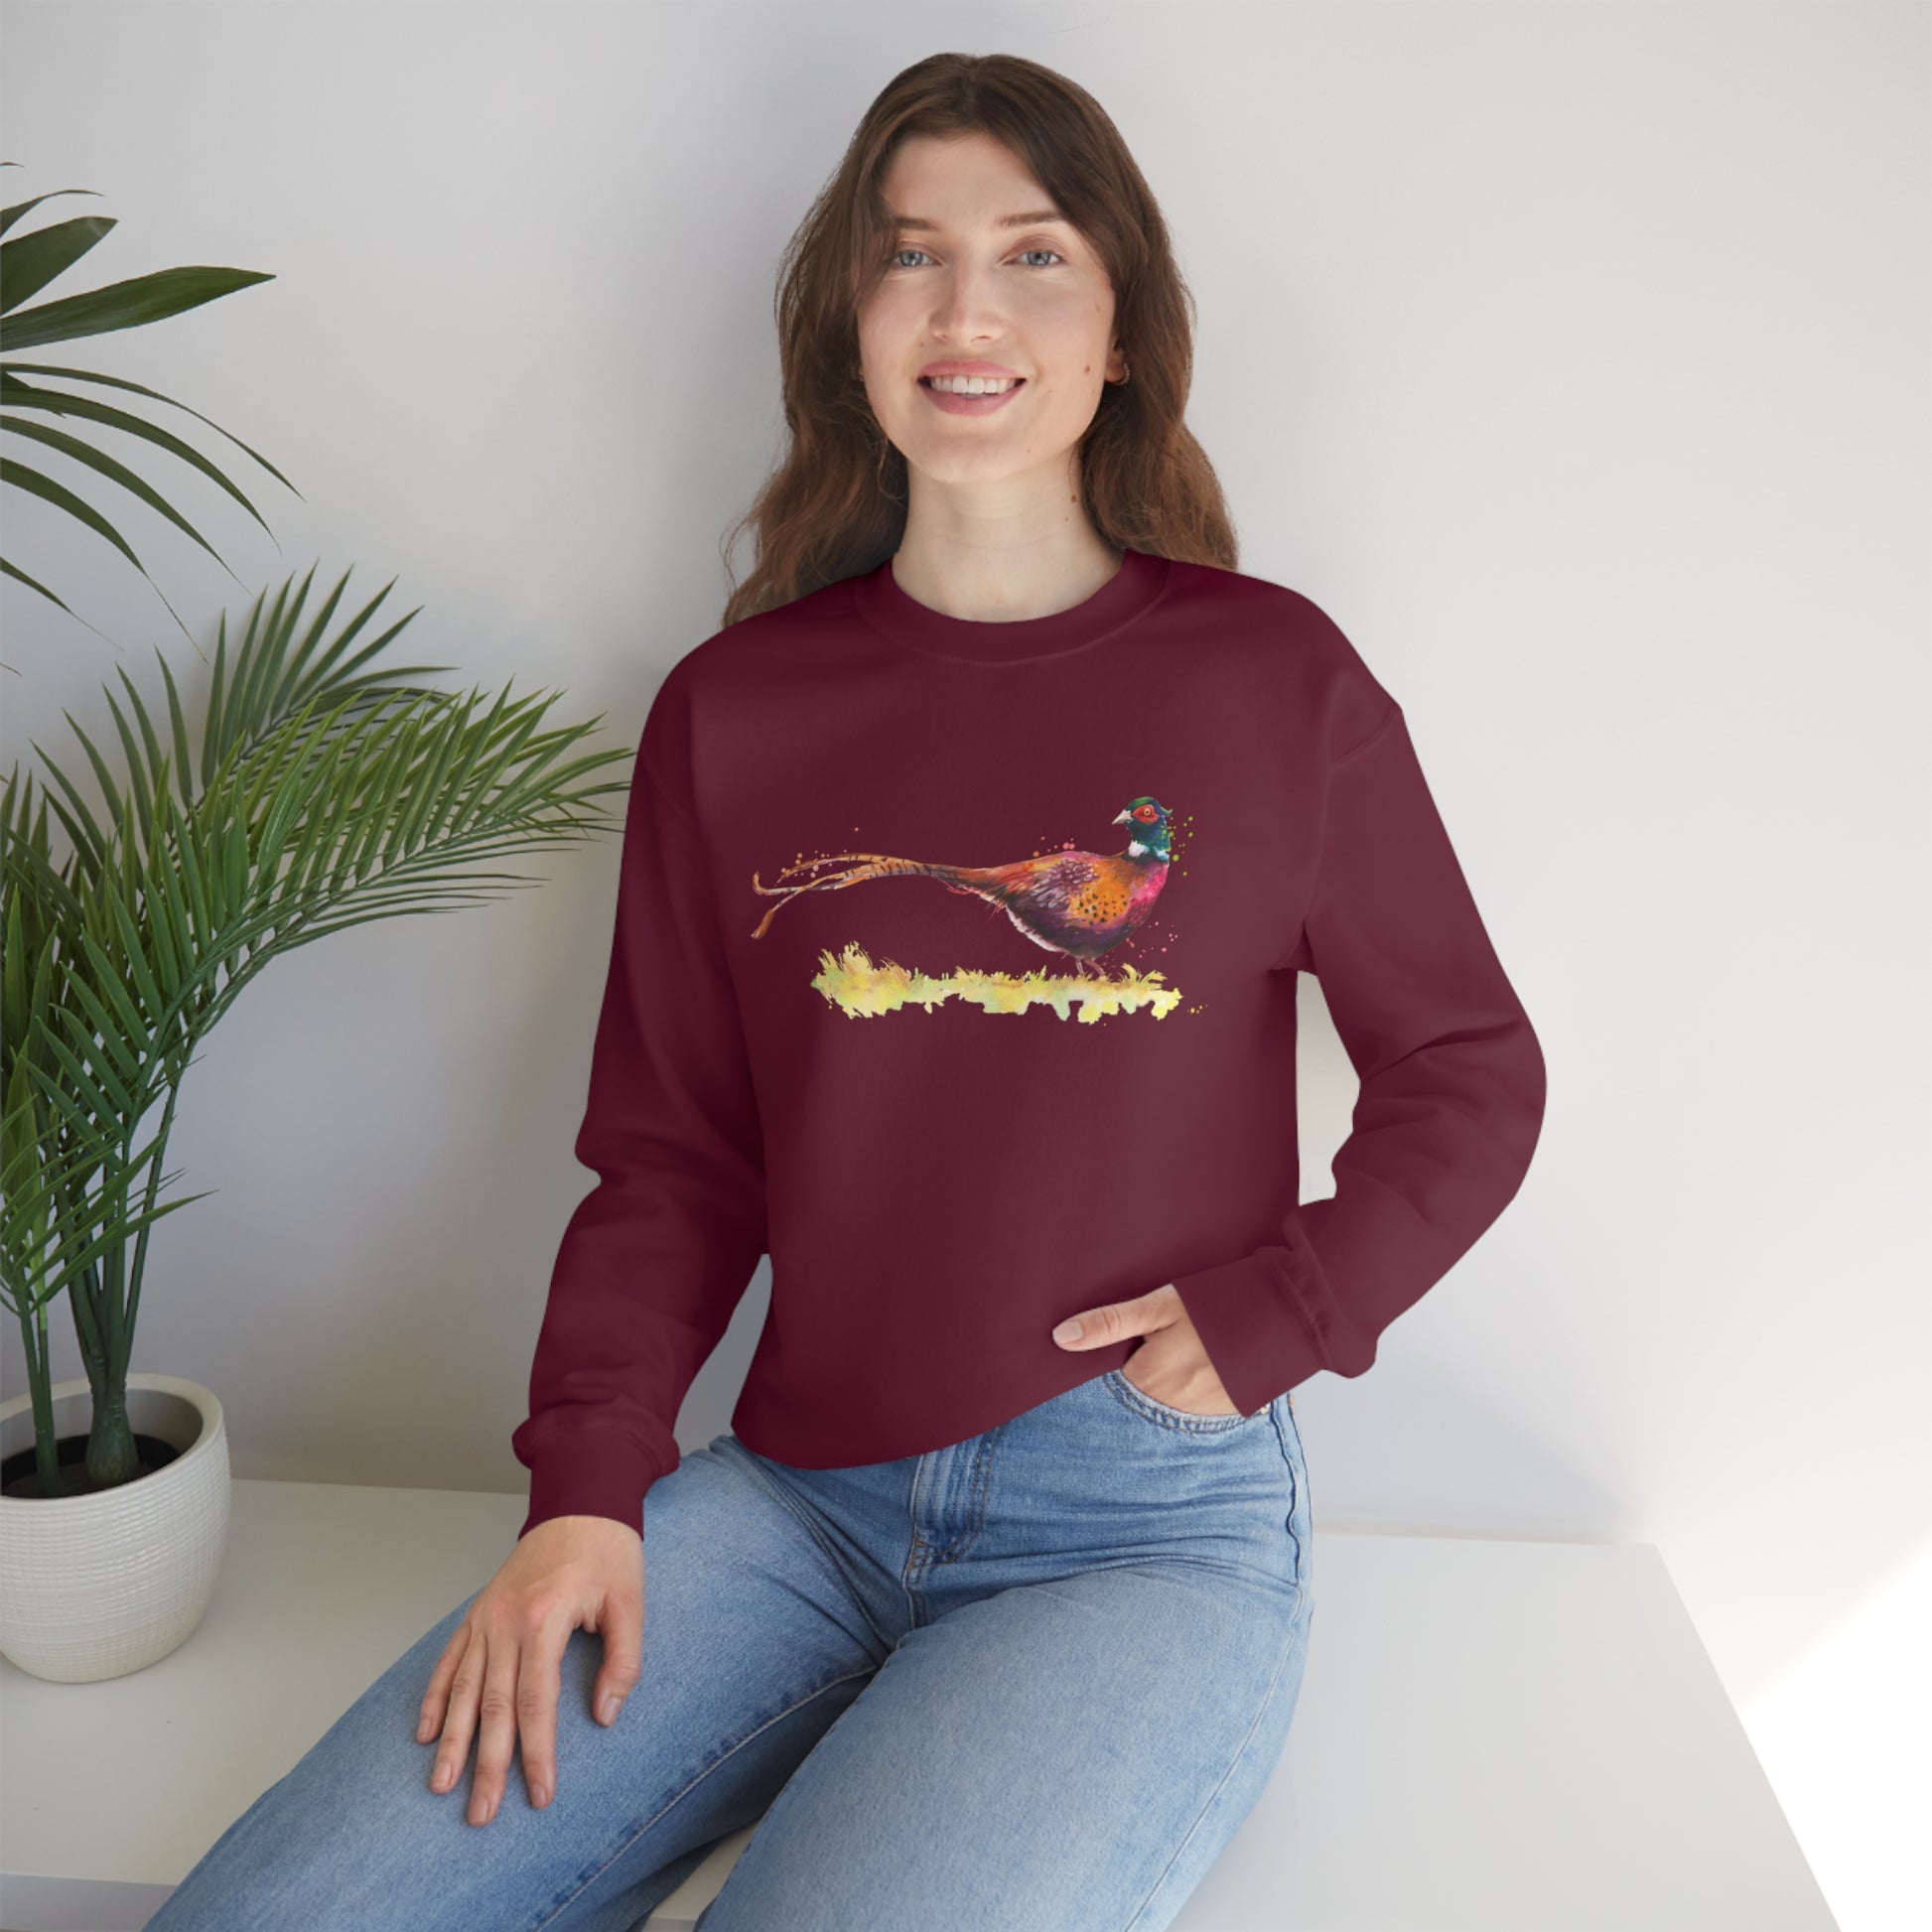 Mock up of a woman sitting on a surface while wearing the Maroon shirt